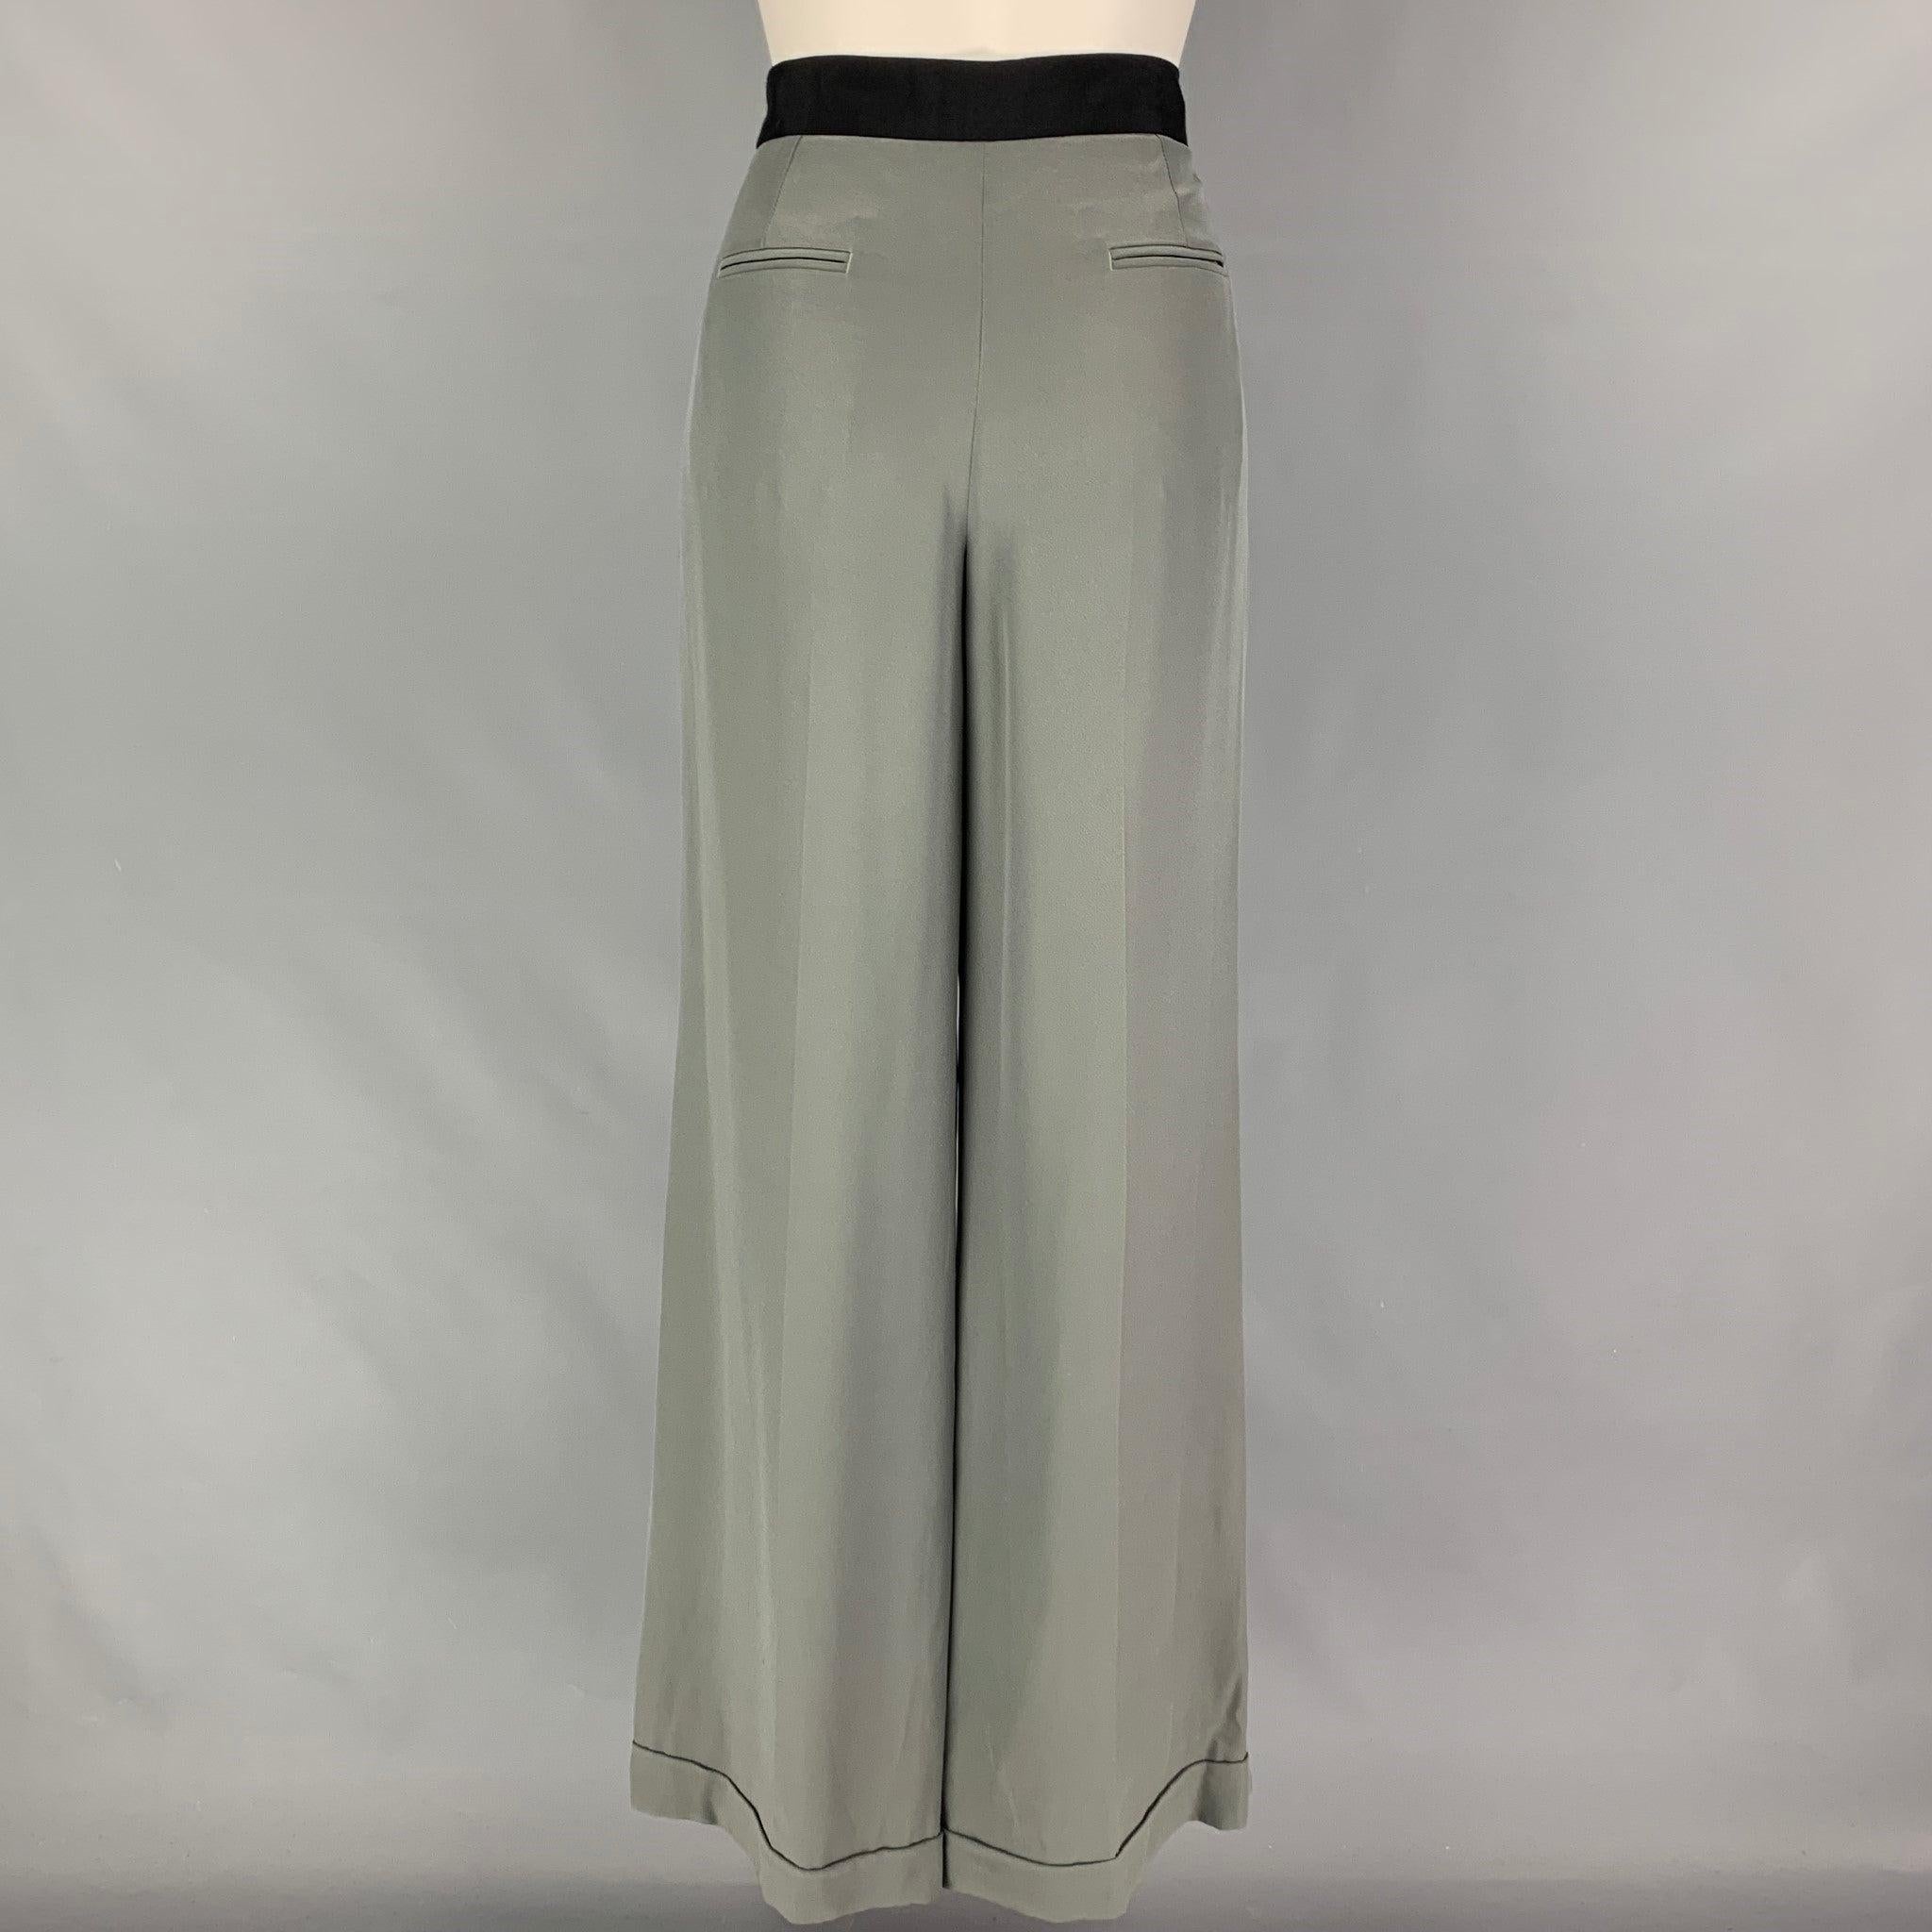 ARMANI COLLEZIONI pants comes in a grey acetate / silk featuring a ribbon waist trim, pleated, wide leg, cuffed front tab, and a zip fly closure. Made in Italy.
New with tags. 

Marked:  6 

Measurements: 
 Waist: 32 inches Rise: 11.5 inches Inseam: